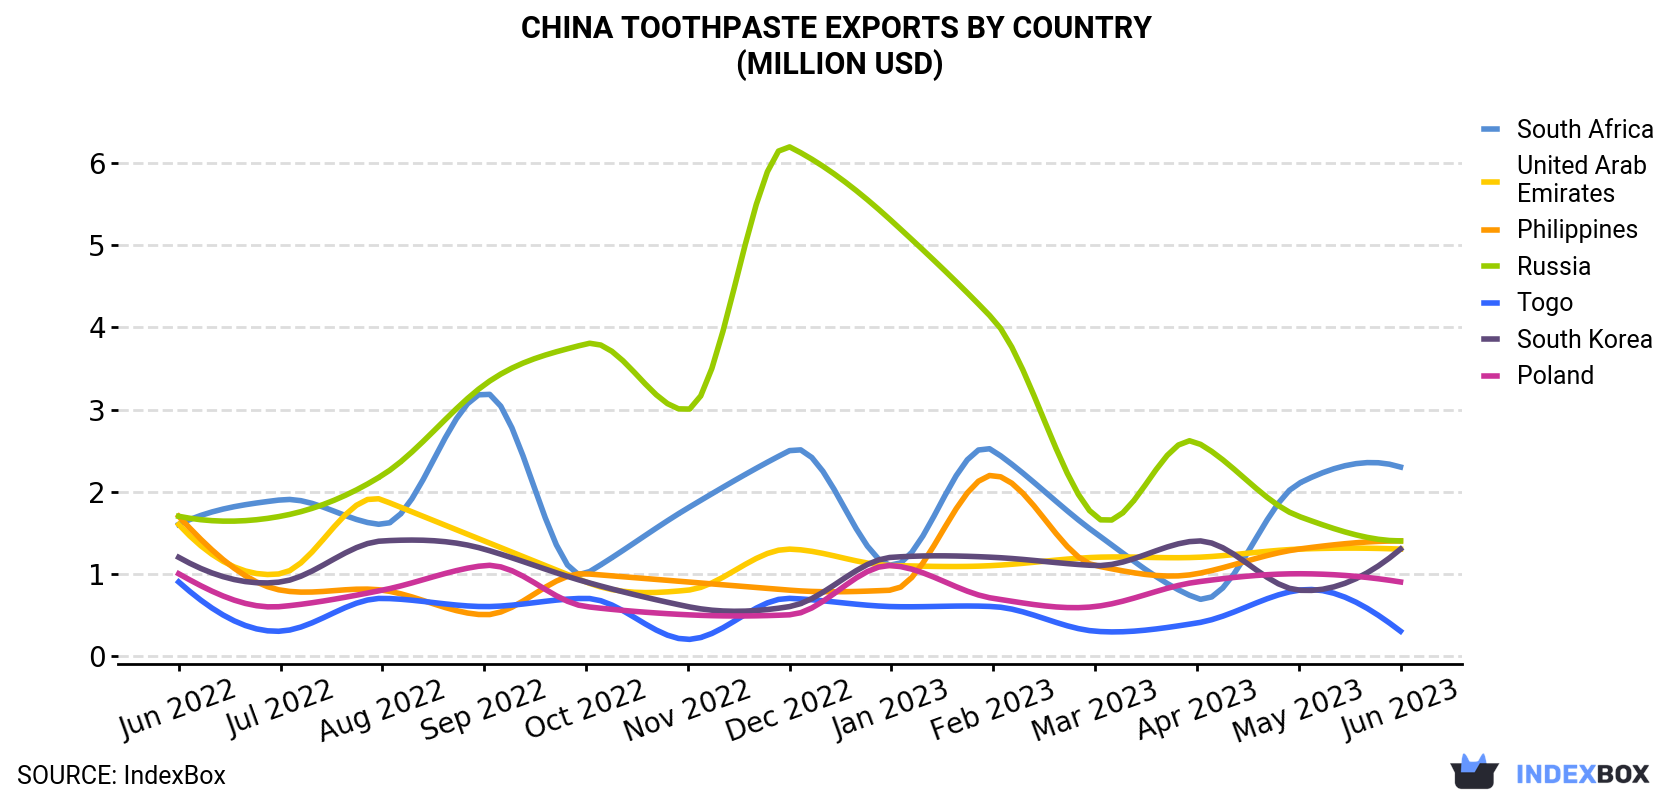 China Toothpaste Exports By Country (Million USD)